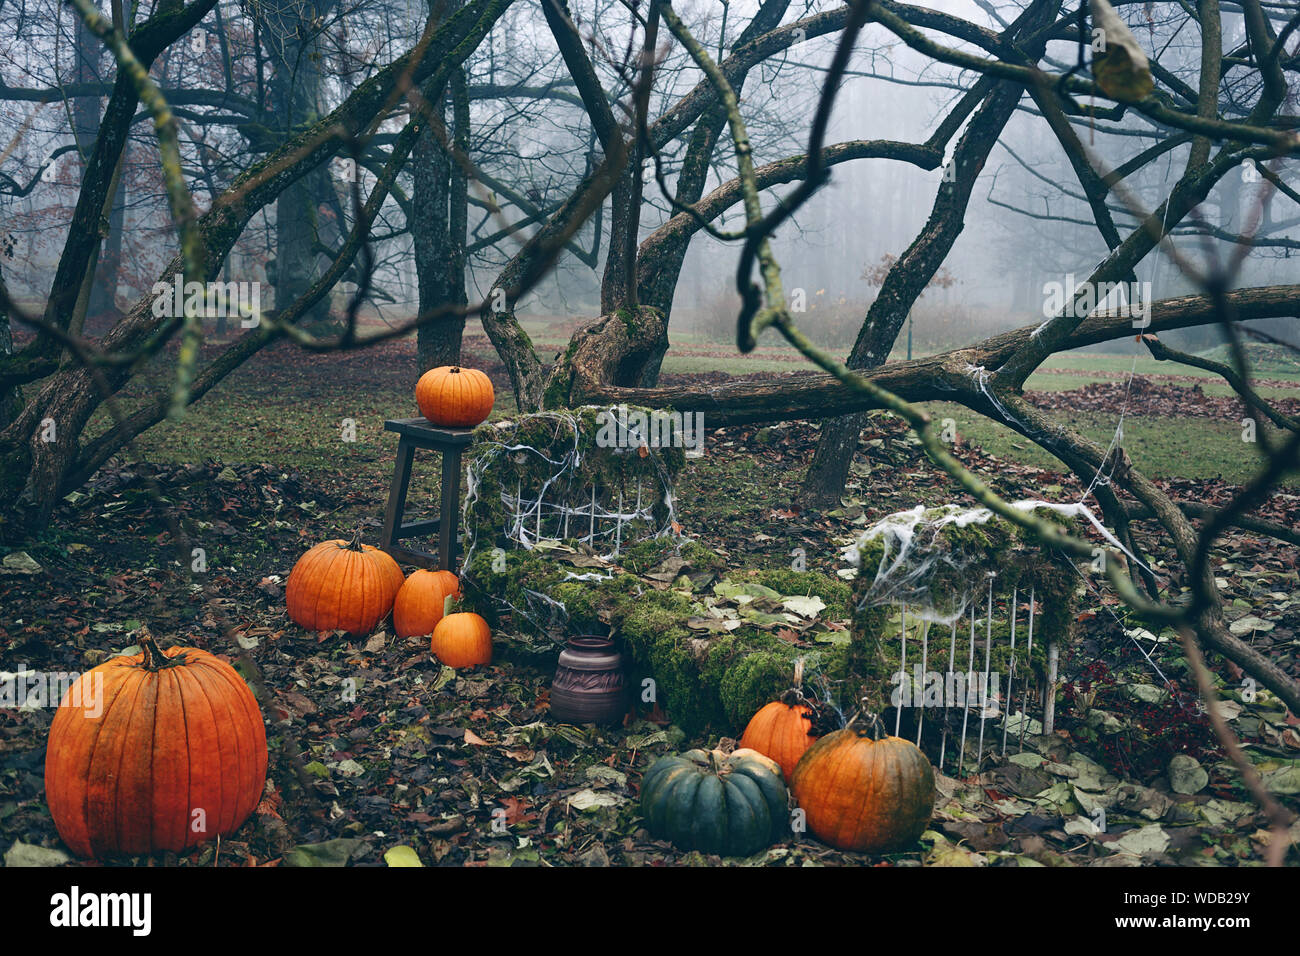 Halloween Decoration With Pumpkins And Spiderwebs Late Autumn In